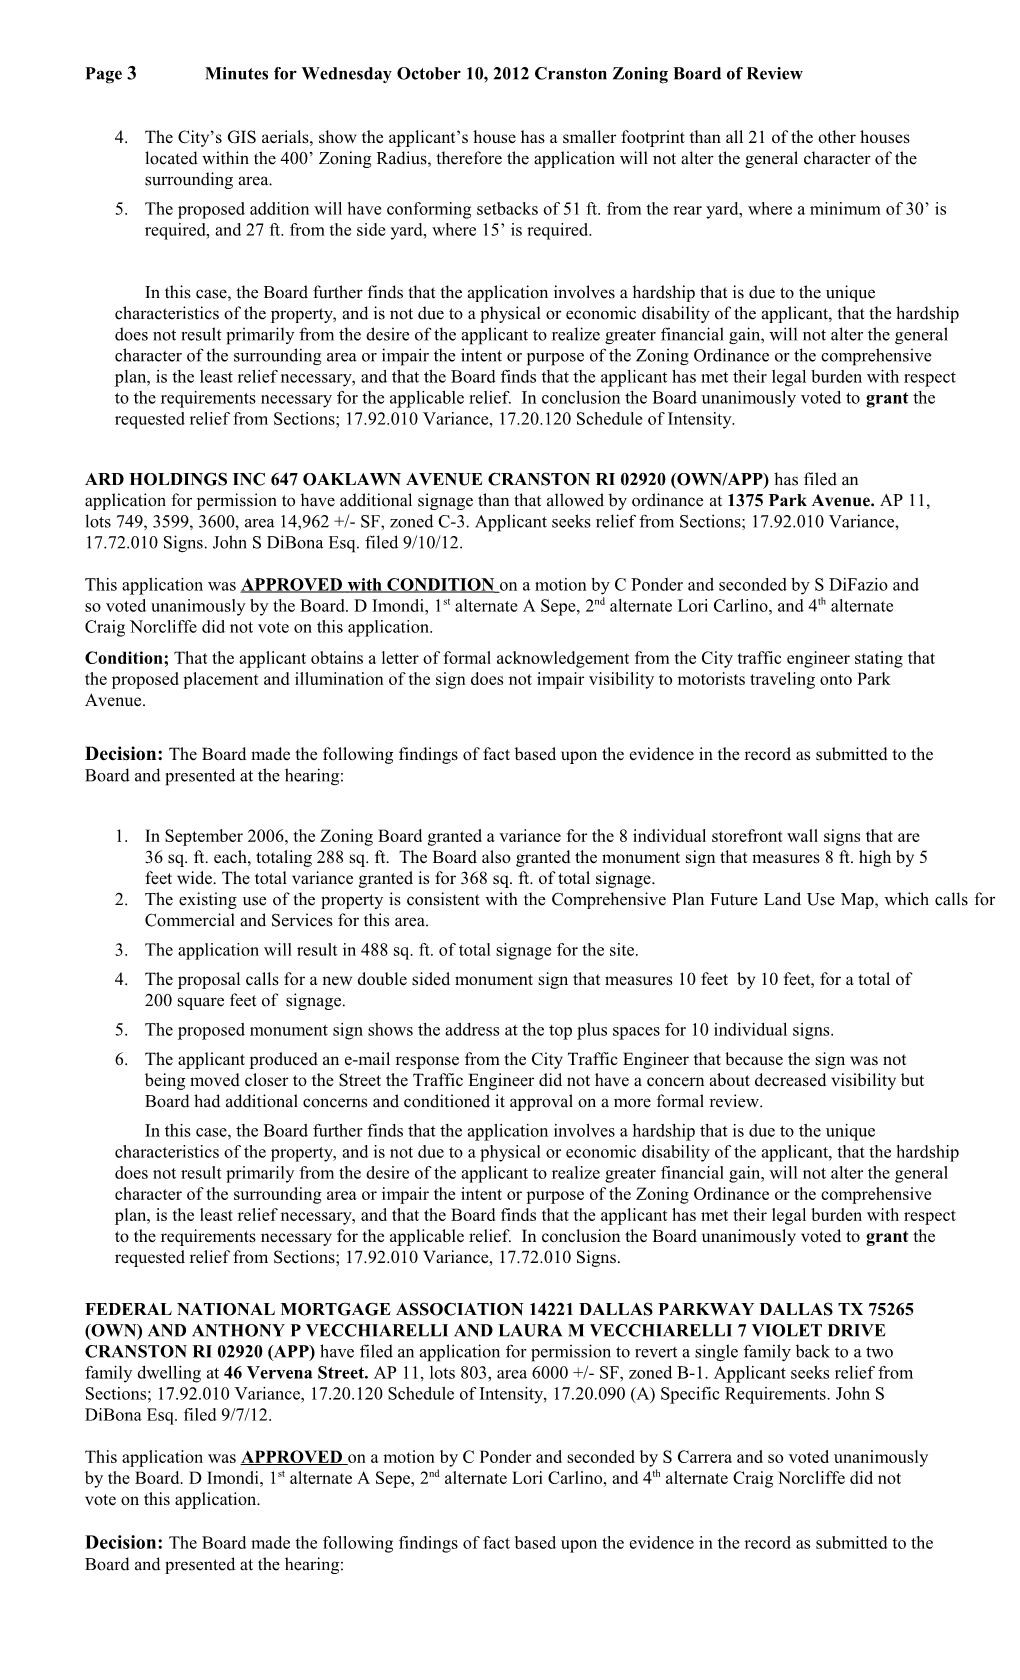 Page 1Minutes for Wednesday October 10, 2012Cranston Zoning Board of Review